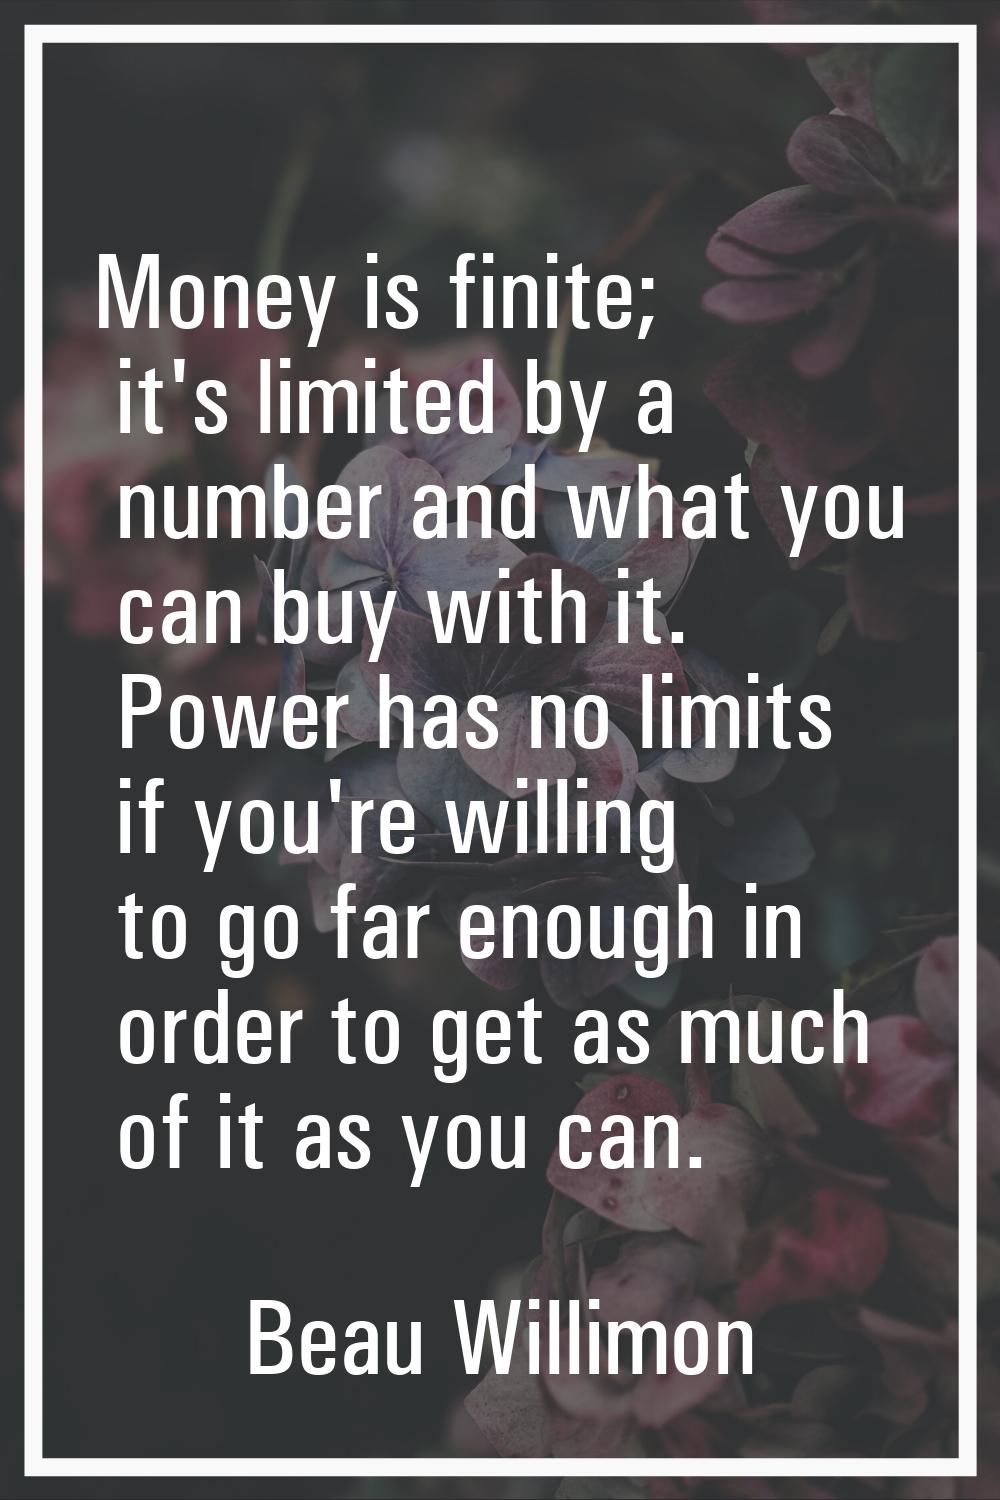 Money is finite; it's limited by a number and what you can buy with it. Power has no limits if you'